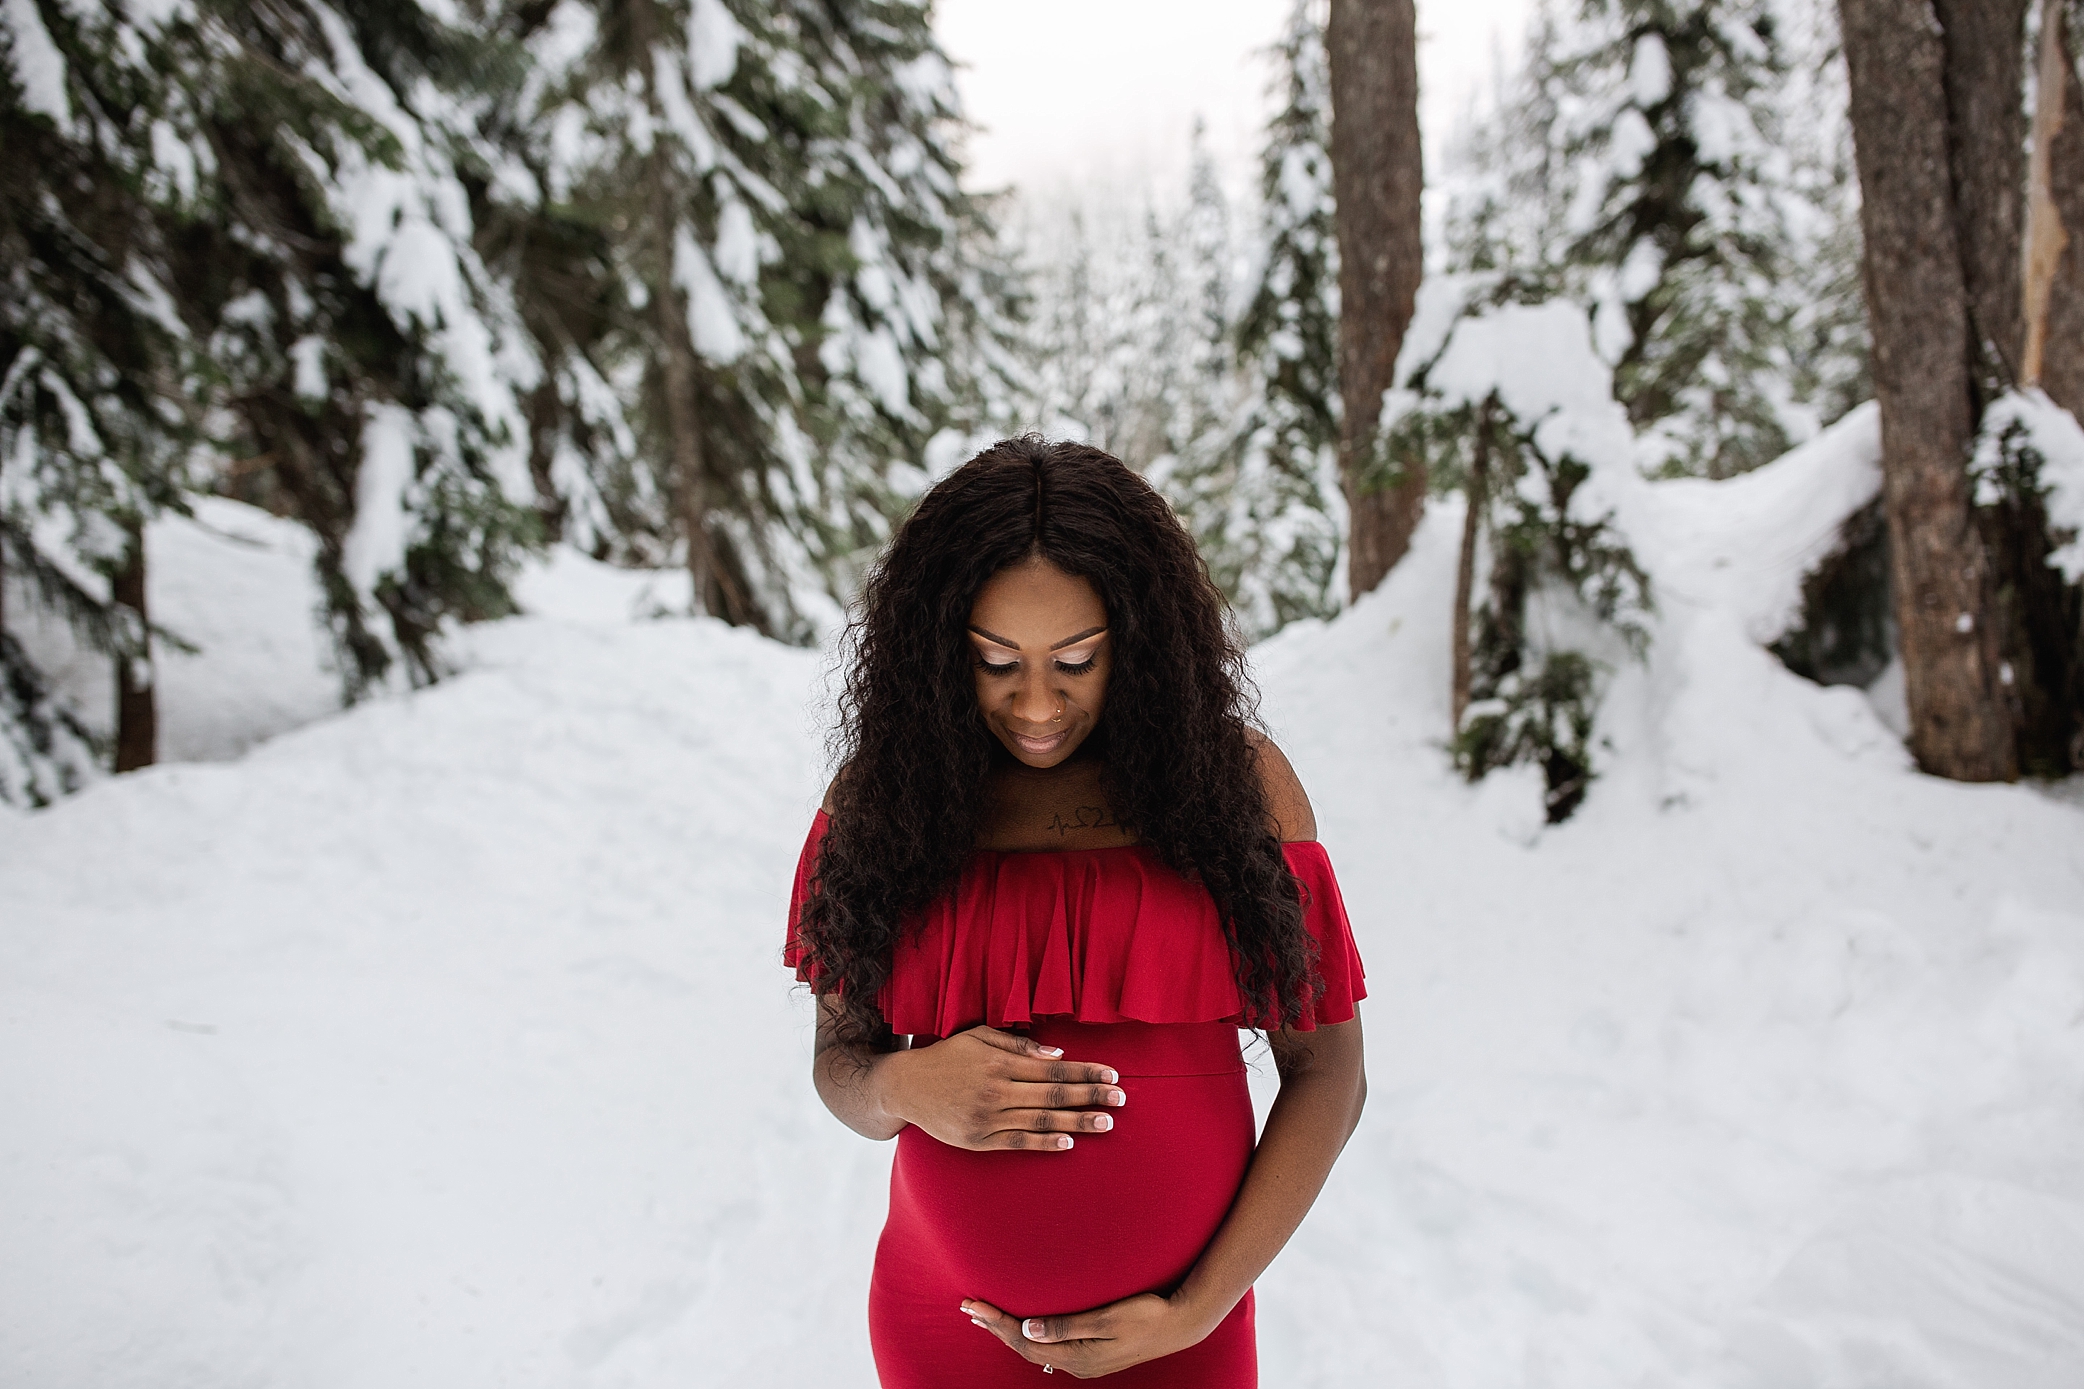 snoqualmie pass maternity session | Seattle maternity photographer | snow maternity session